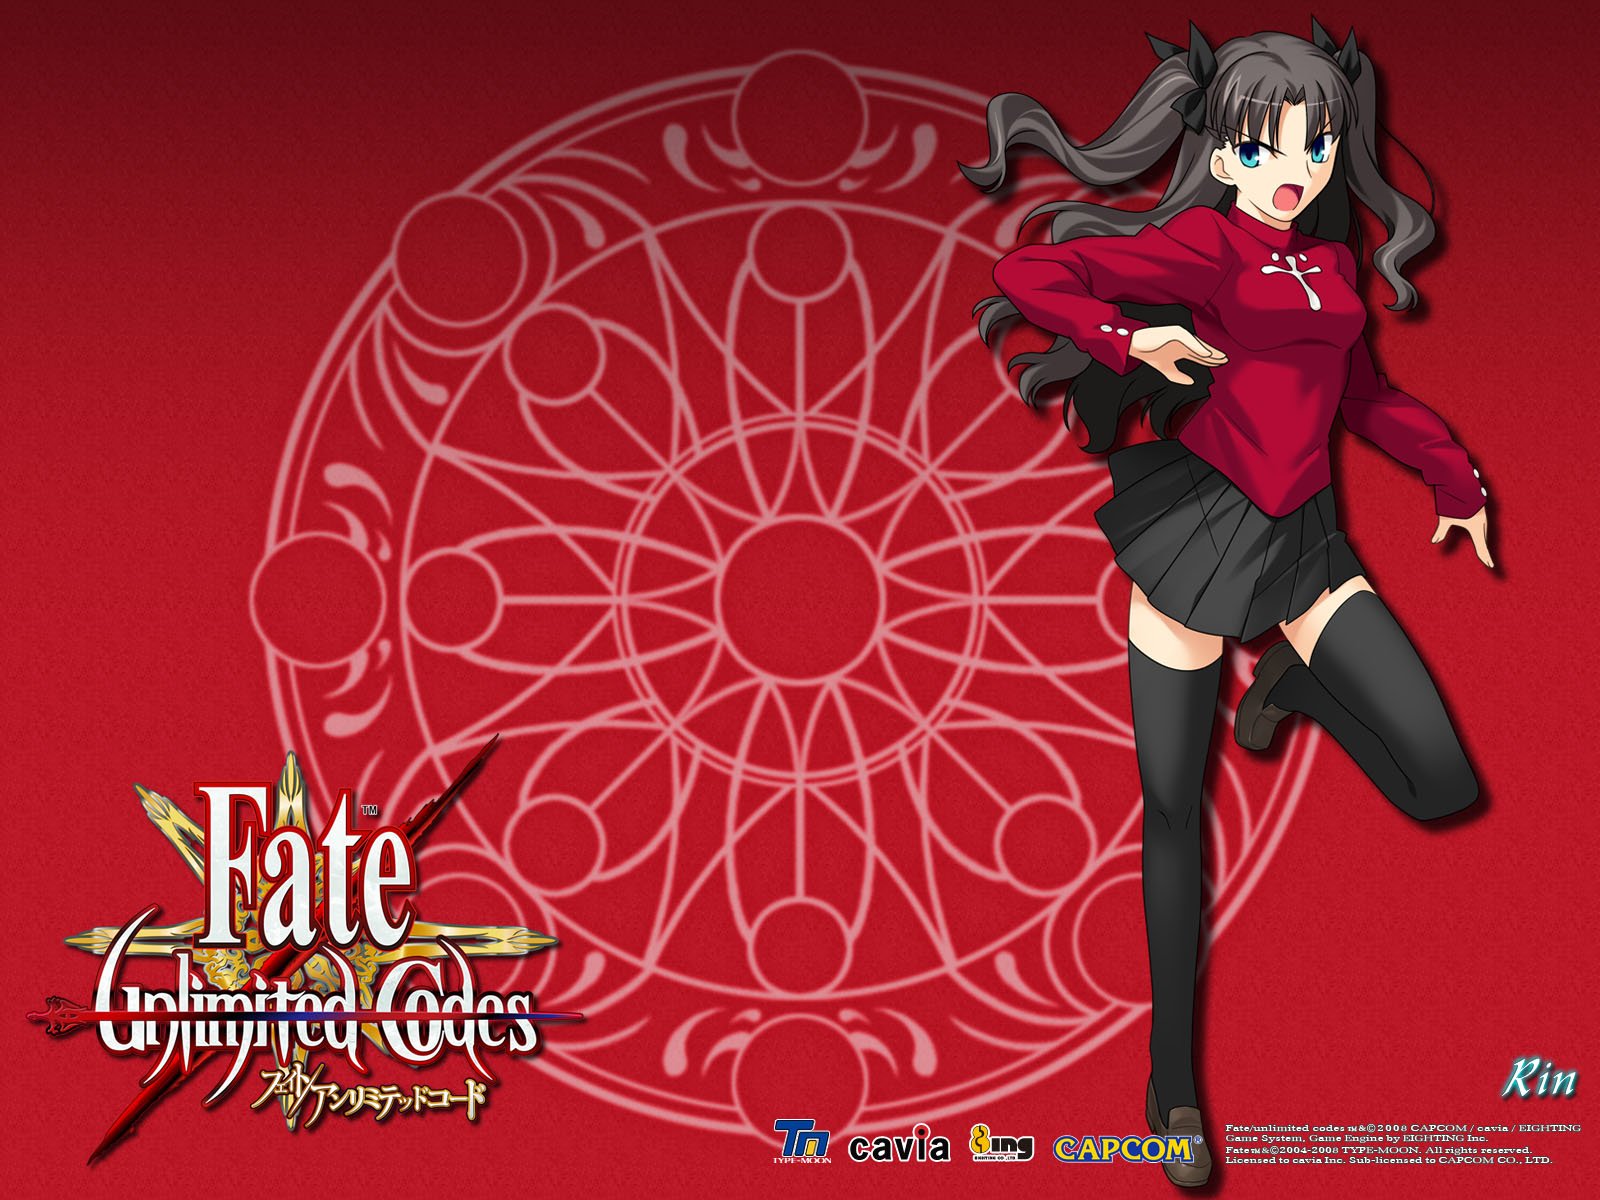 Fate/Unlimited Codes Wallpapers